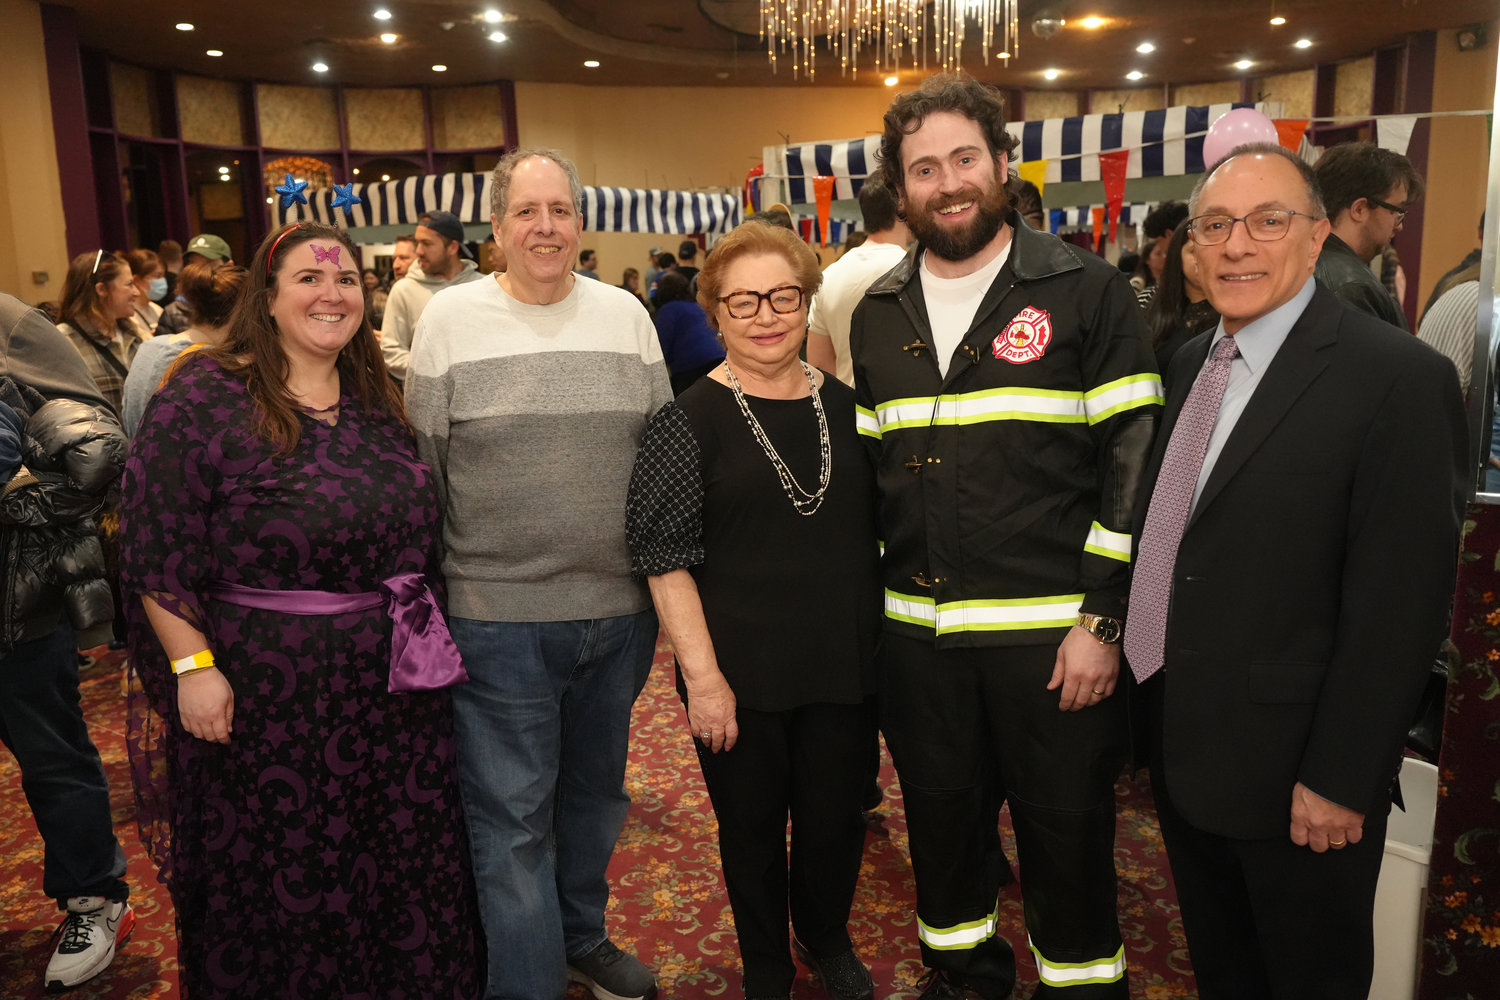 At the 28th Annual Mel Polay Purim Carnival, Reb Rishe Groner, President of Congregation Beth Ohr Joseph Weisbord, carnival organizer Evelyn Polay, Cantor Joshua Diamond, and Legislator Michael Giangregorio. Polay created the carnival 28 years ago, in honor of her late husband, Mel.